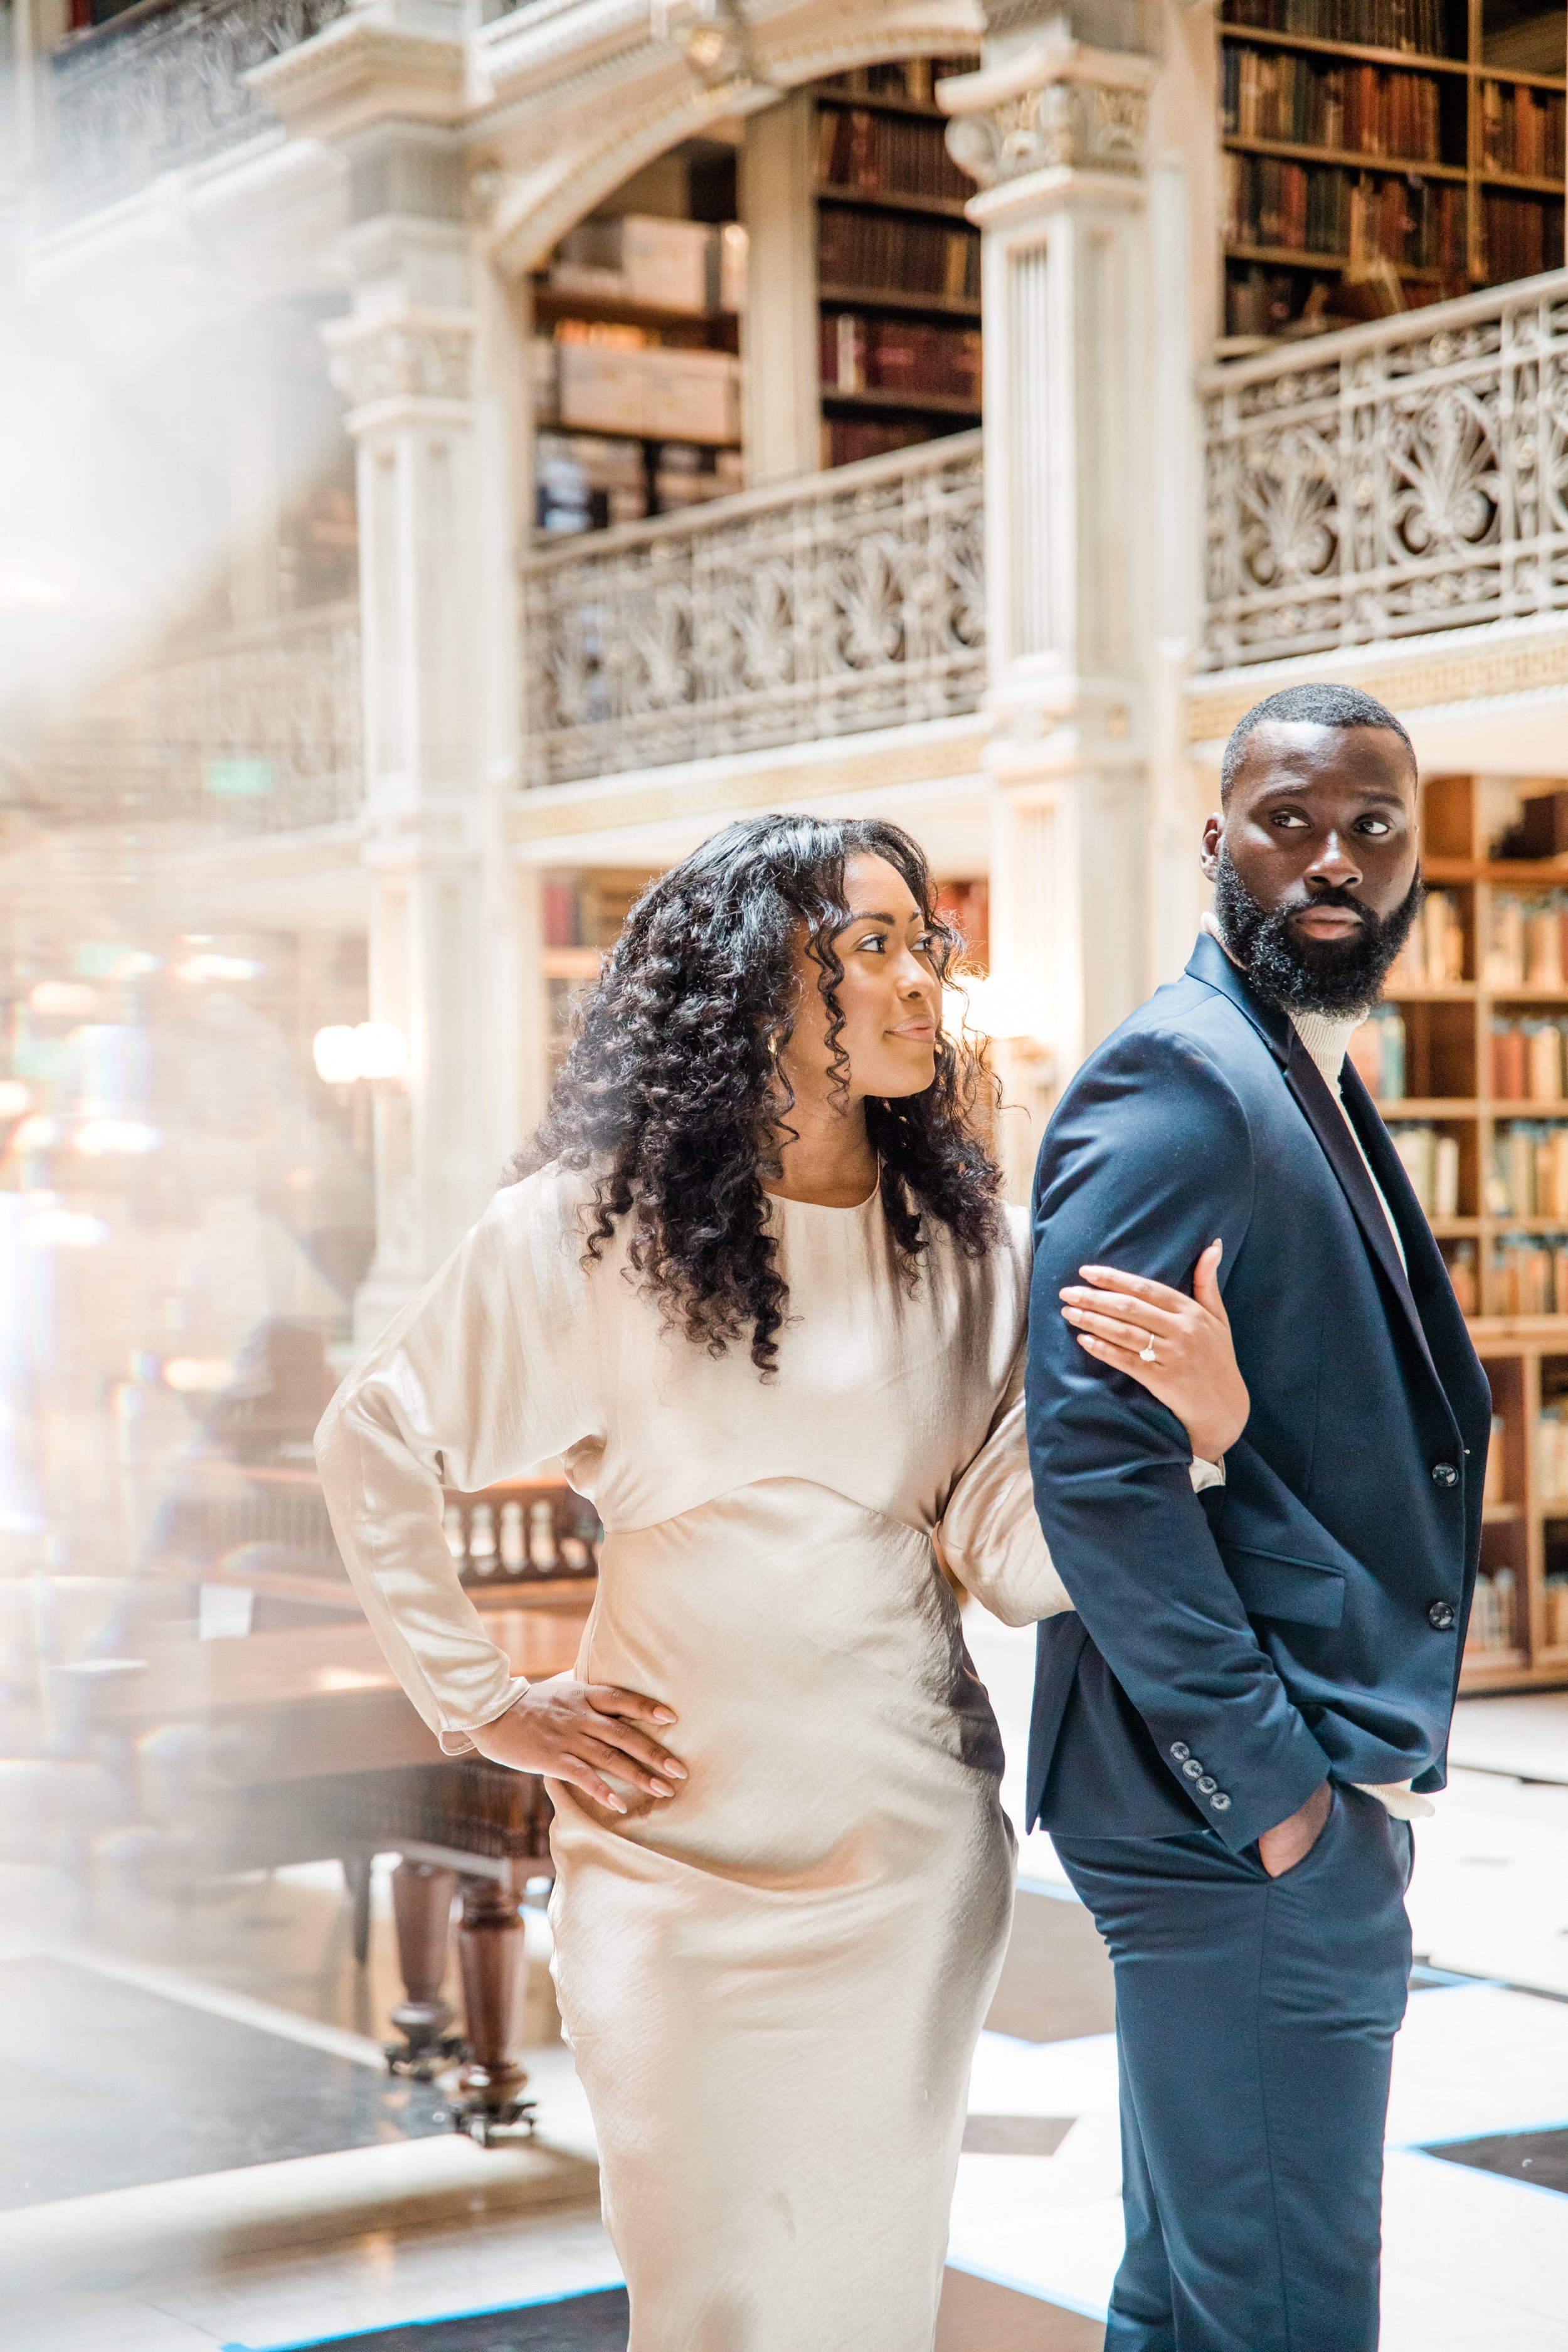 Disney Beauty and The Beast Inspired Engagement Session at The Peabody Library Baltimore Maryland shot by Megapixels Media Photography-39.jpg